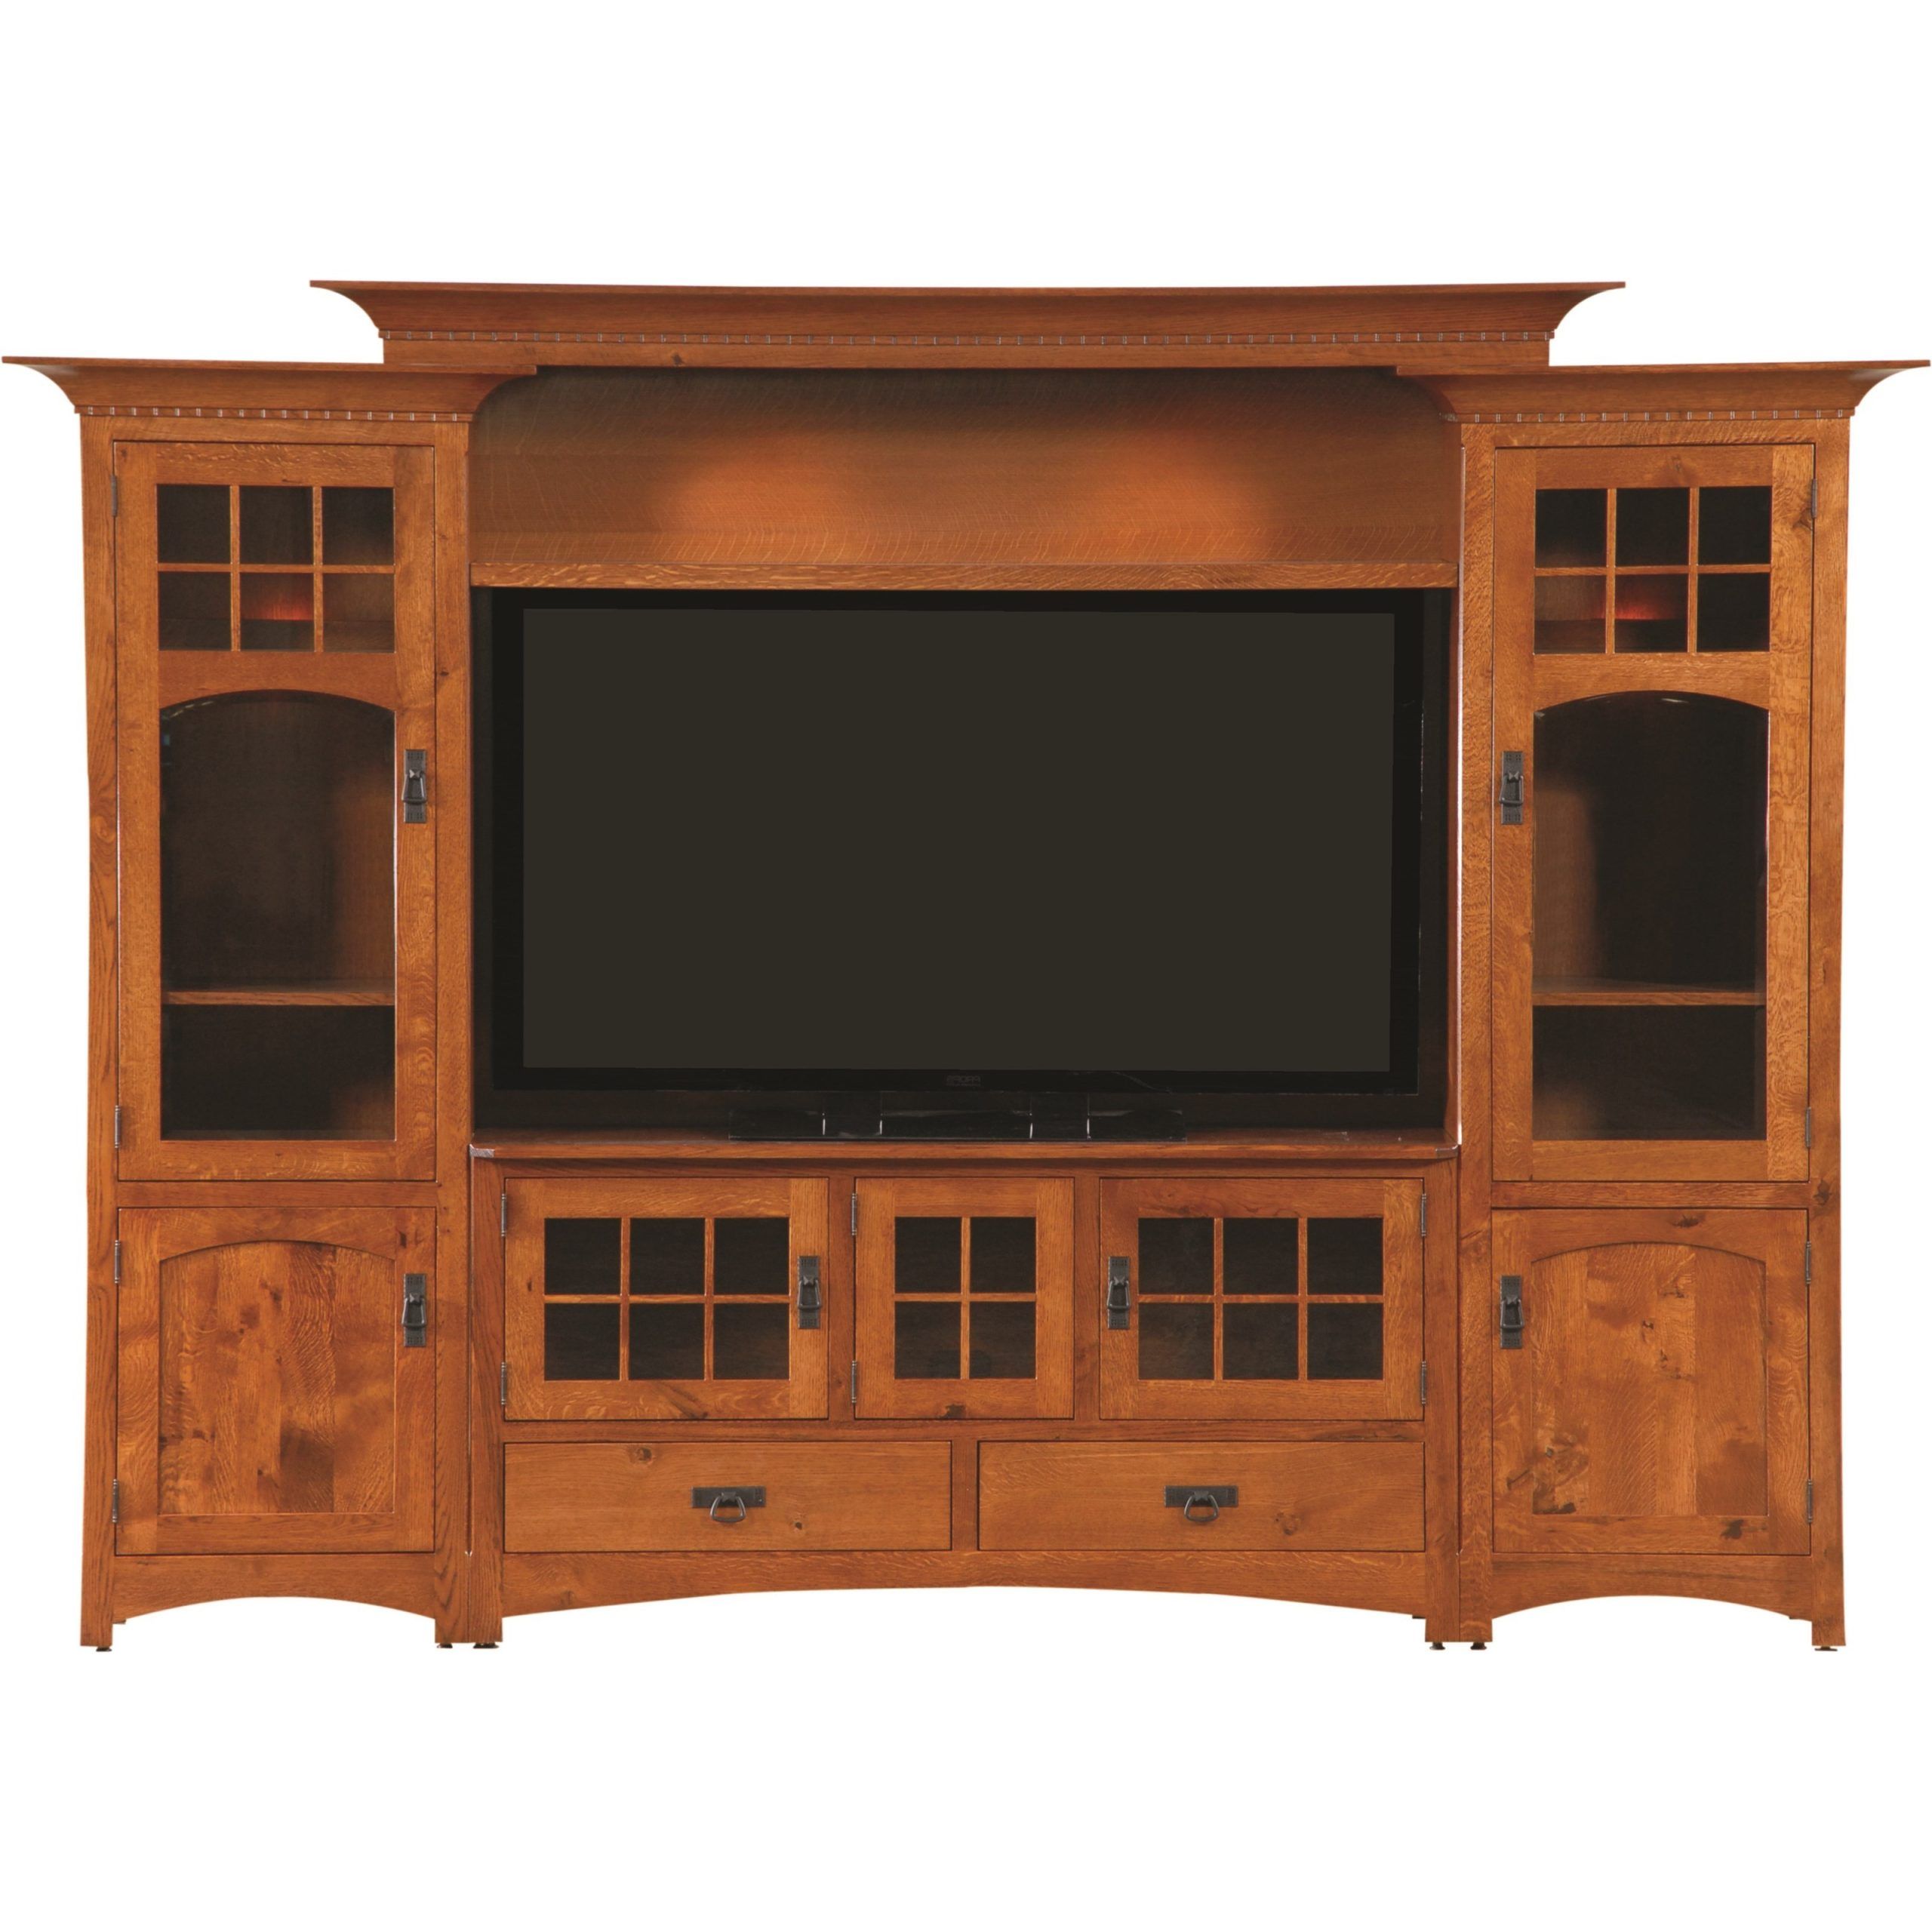 Integ Wood Products Entertainment Wb222 Customizable Winchester Bridge Wall  Unit With Wire Management And Can Lighting | Saugerties Furniture Mart |  Wall Unit Within Entertainment Units With Bridge (Gallery 1 of 20)